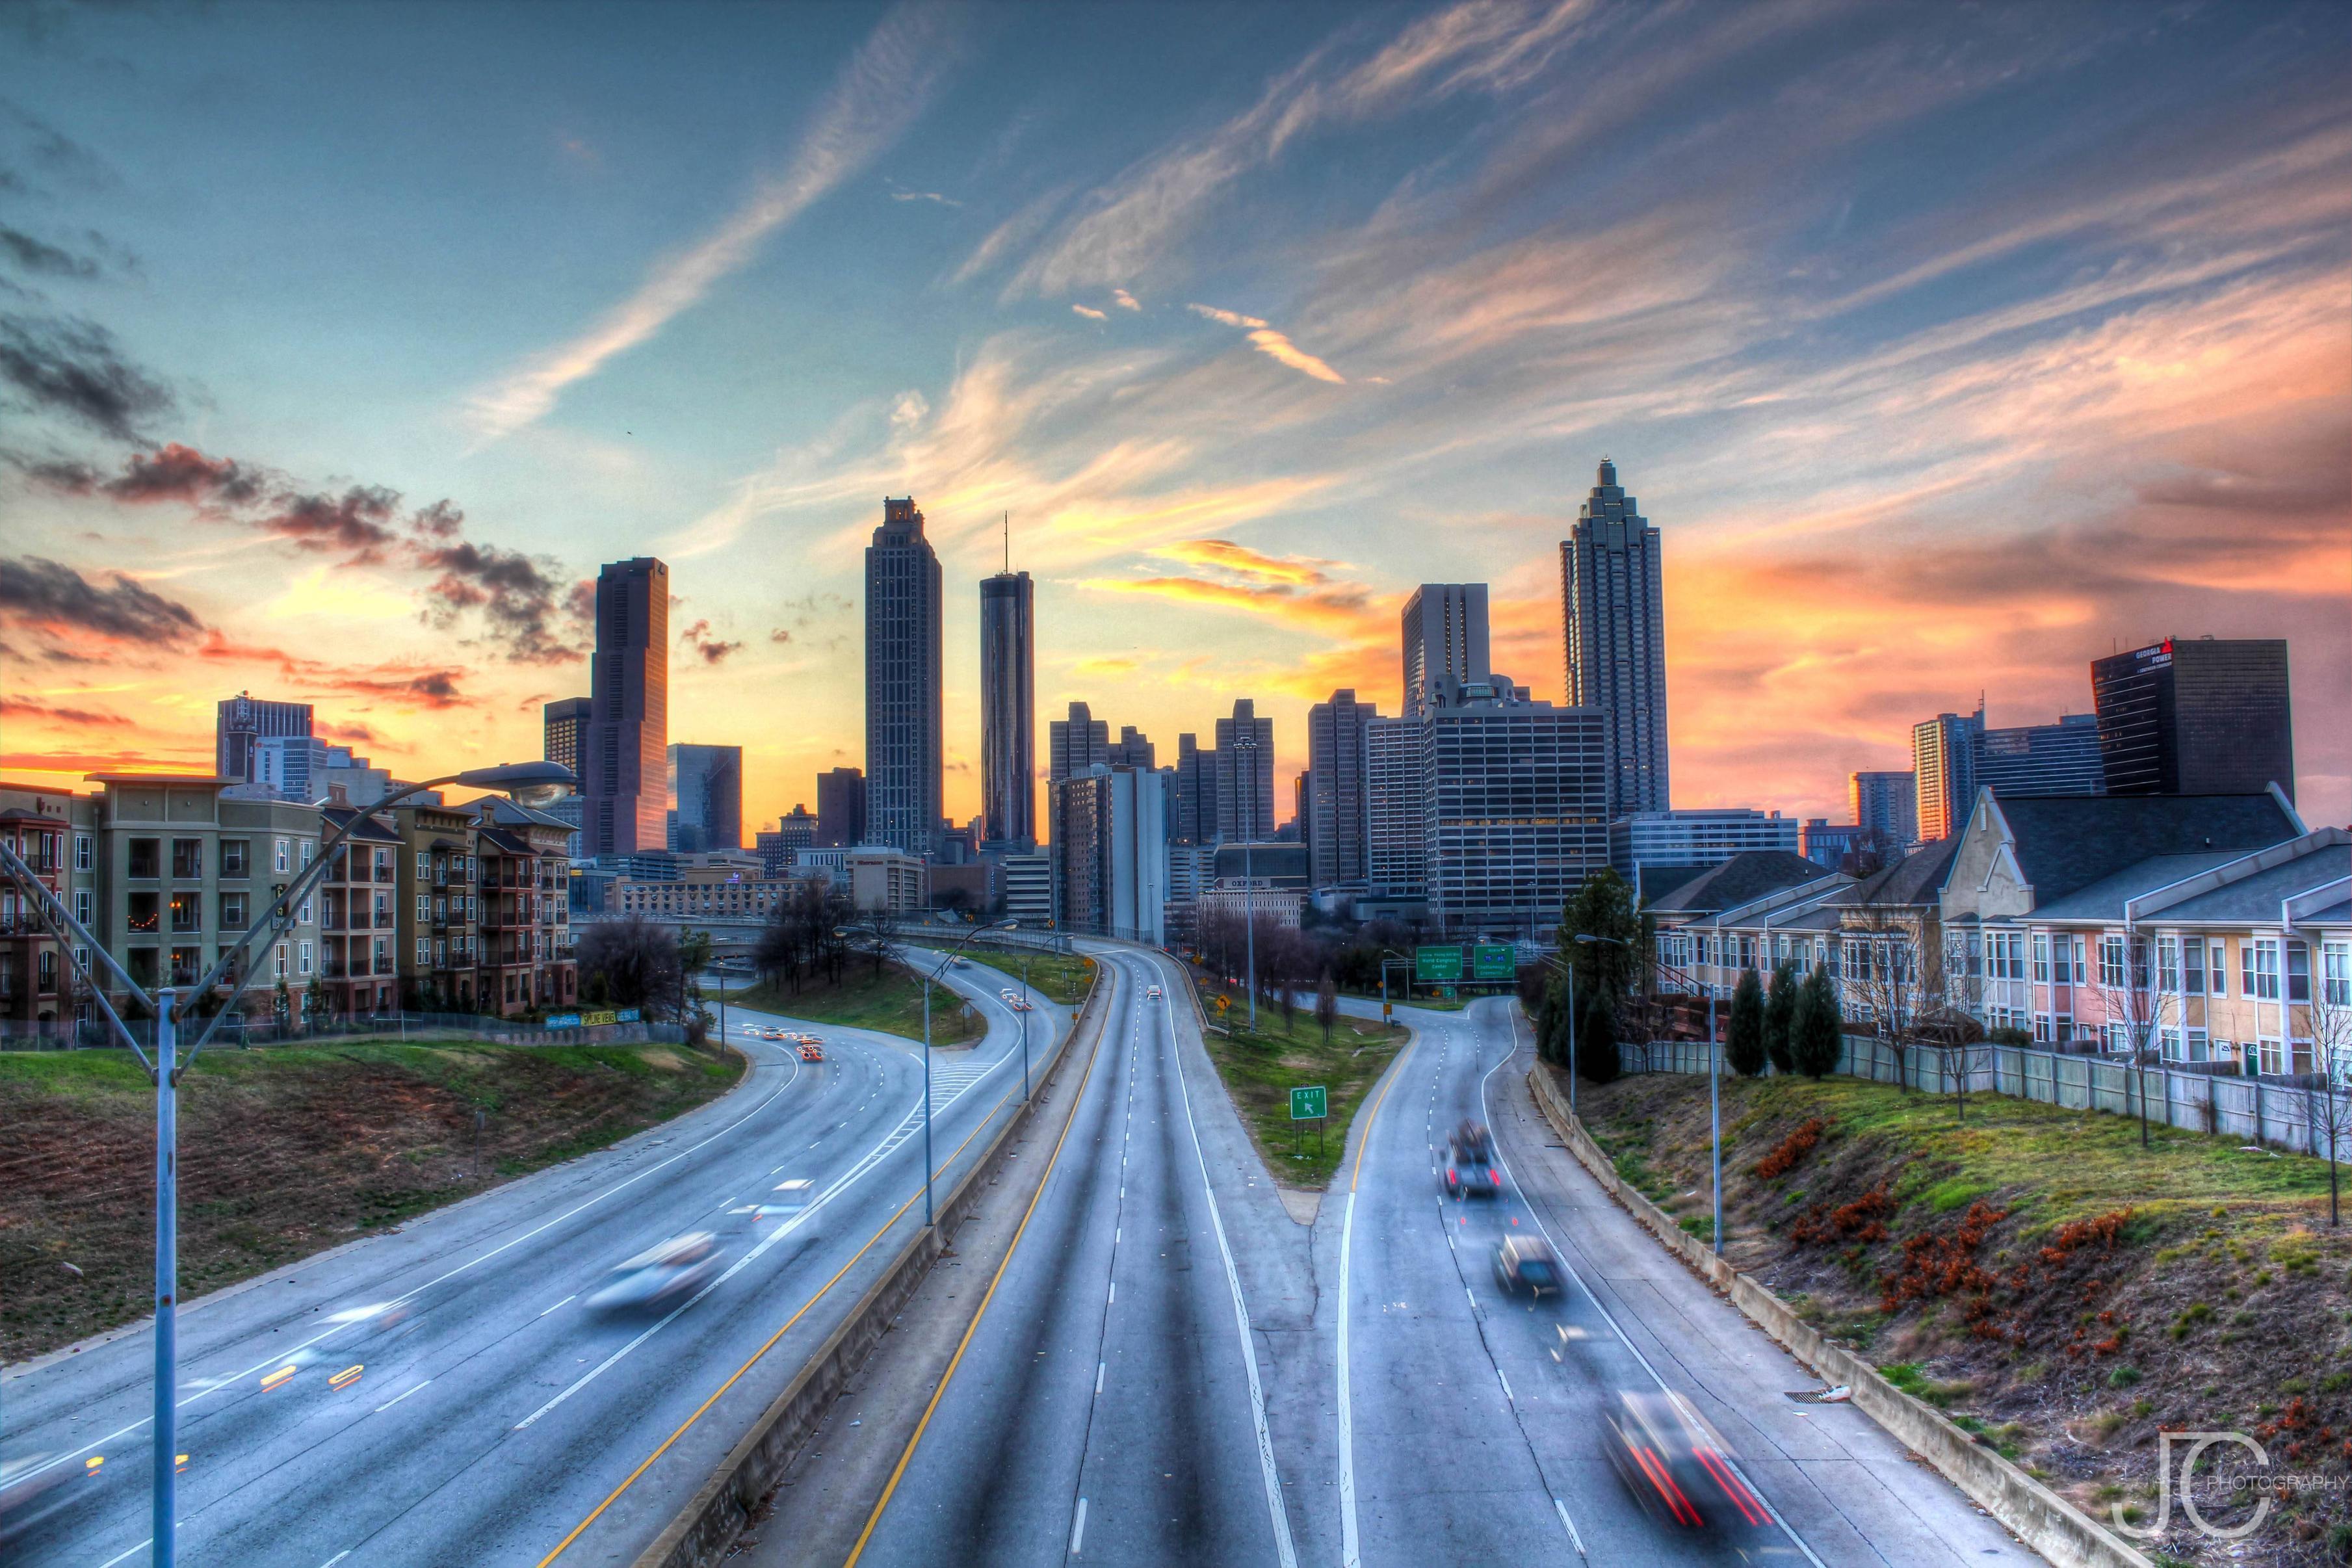 100 Beautiful Atlanta Pictures  Download Free Images on Unsplash